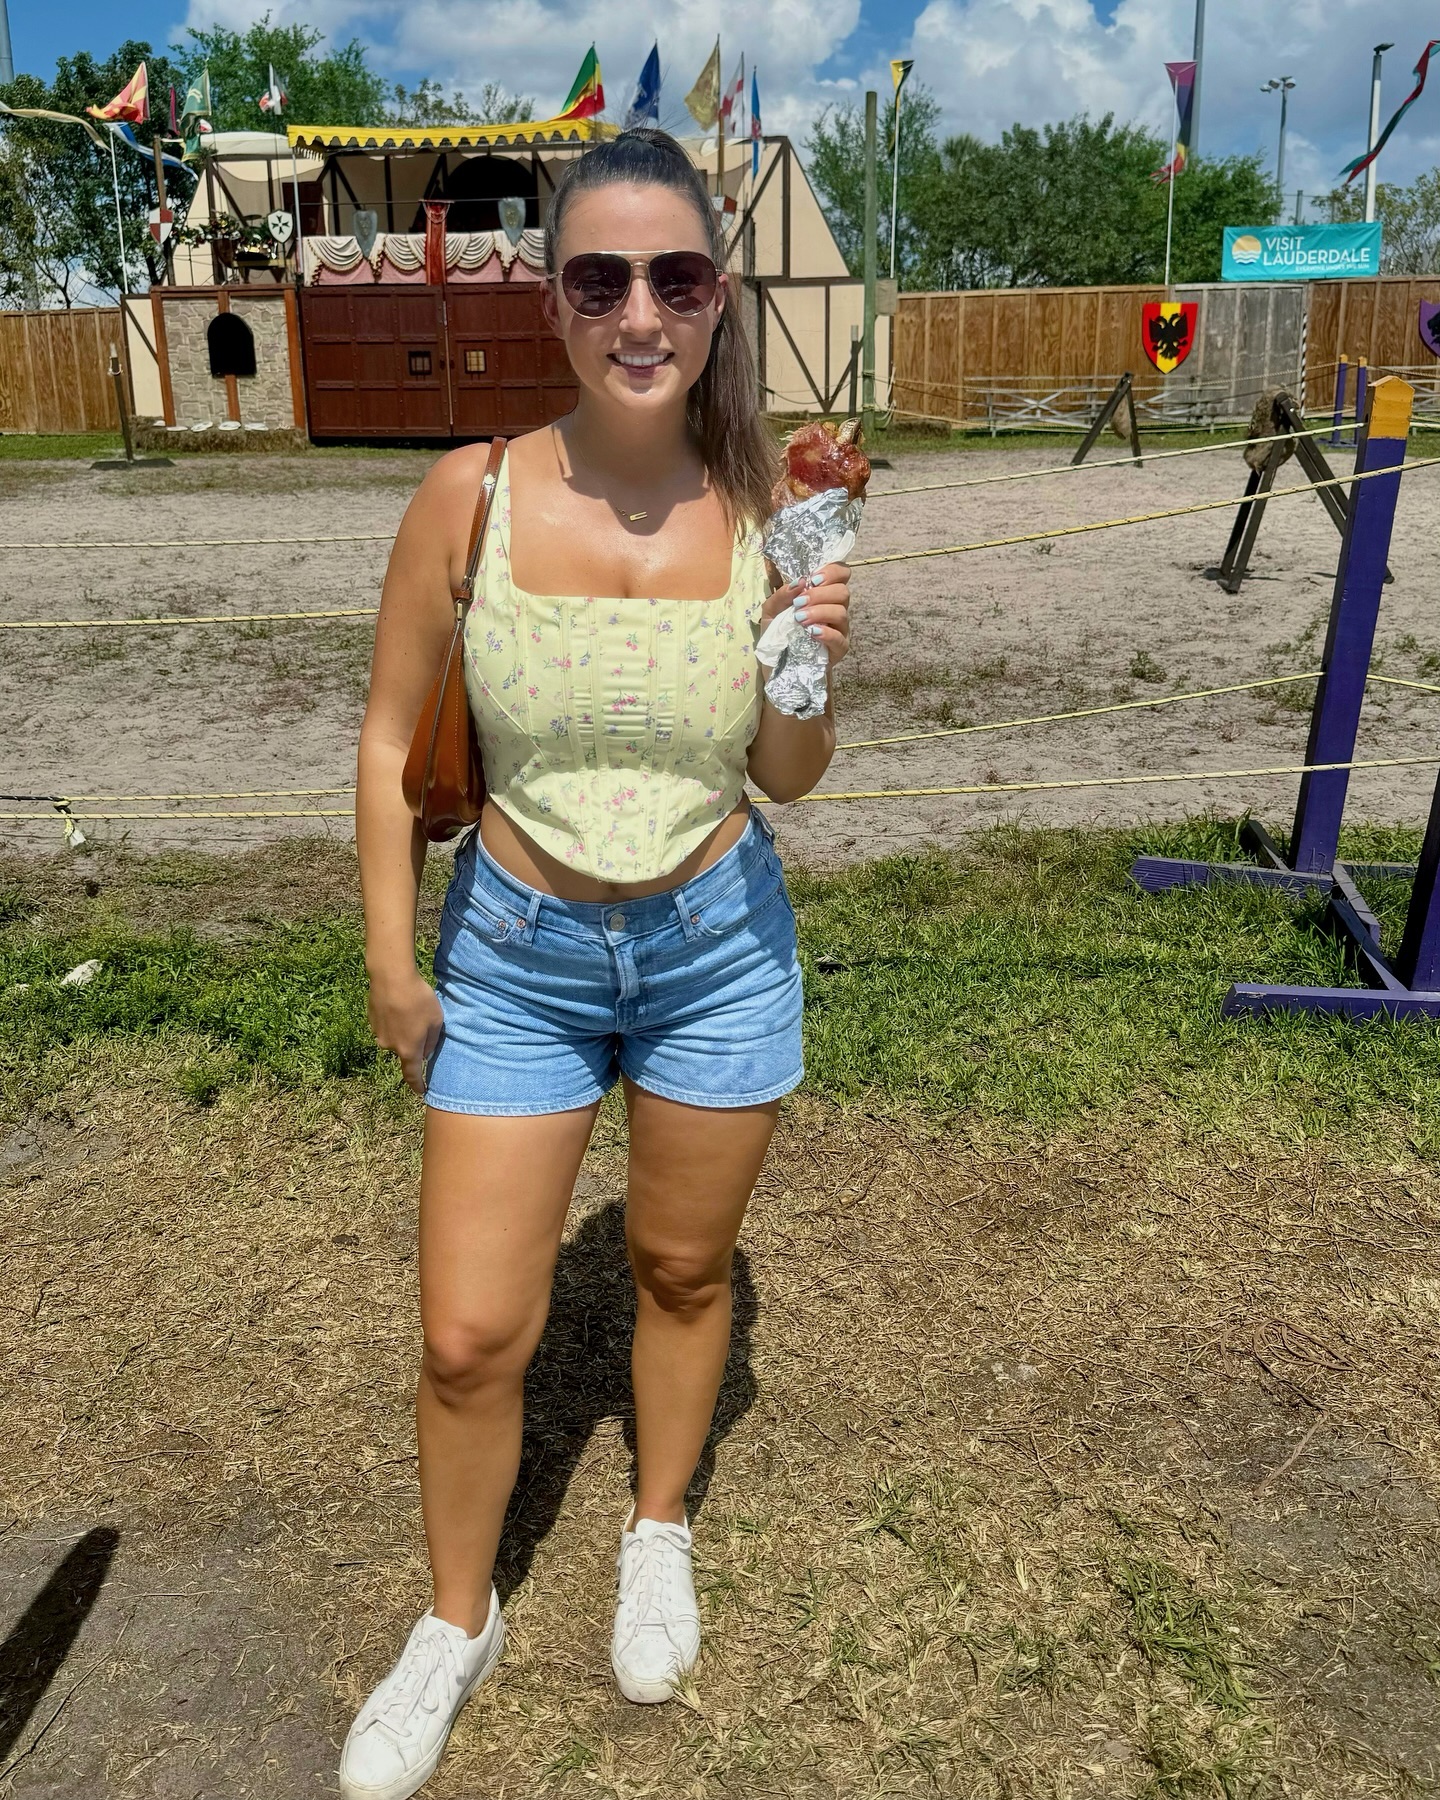 Turkey leg with a side of jousting! Haven’t been to a renaissance festival since I was little, had a great time! 🗡️🍻☘️

#renaissancefestival #visitflorida #festival #stpatricksday #visitlauderdale